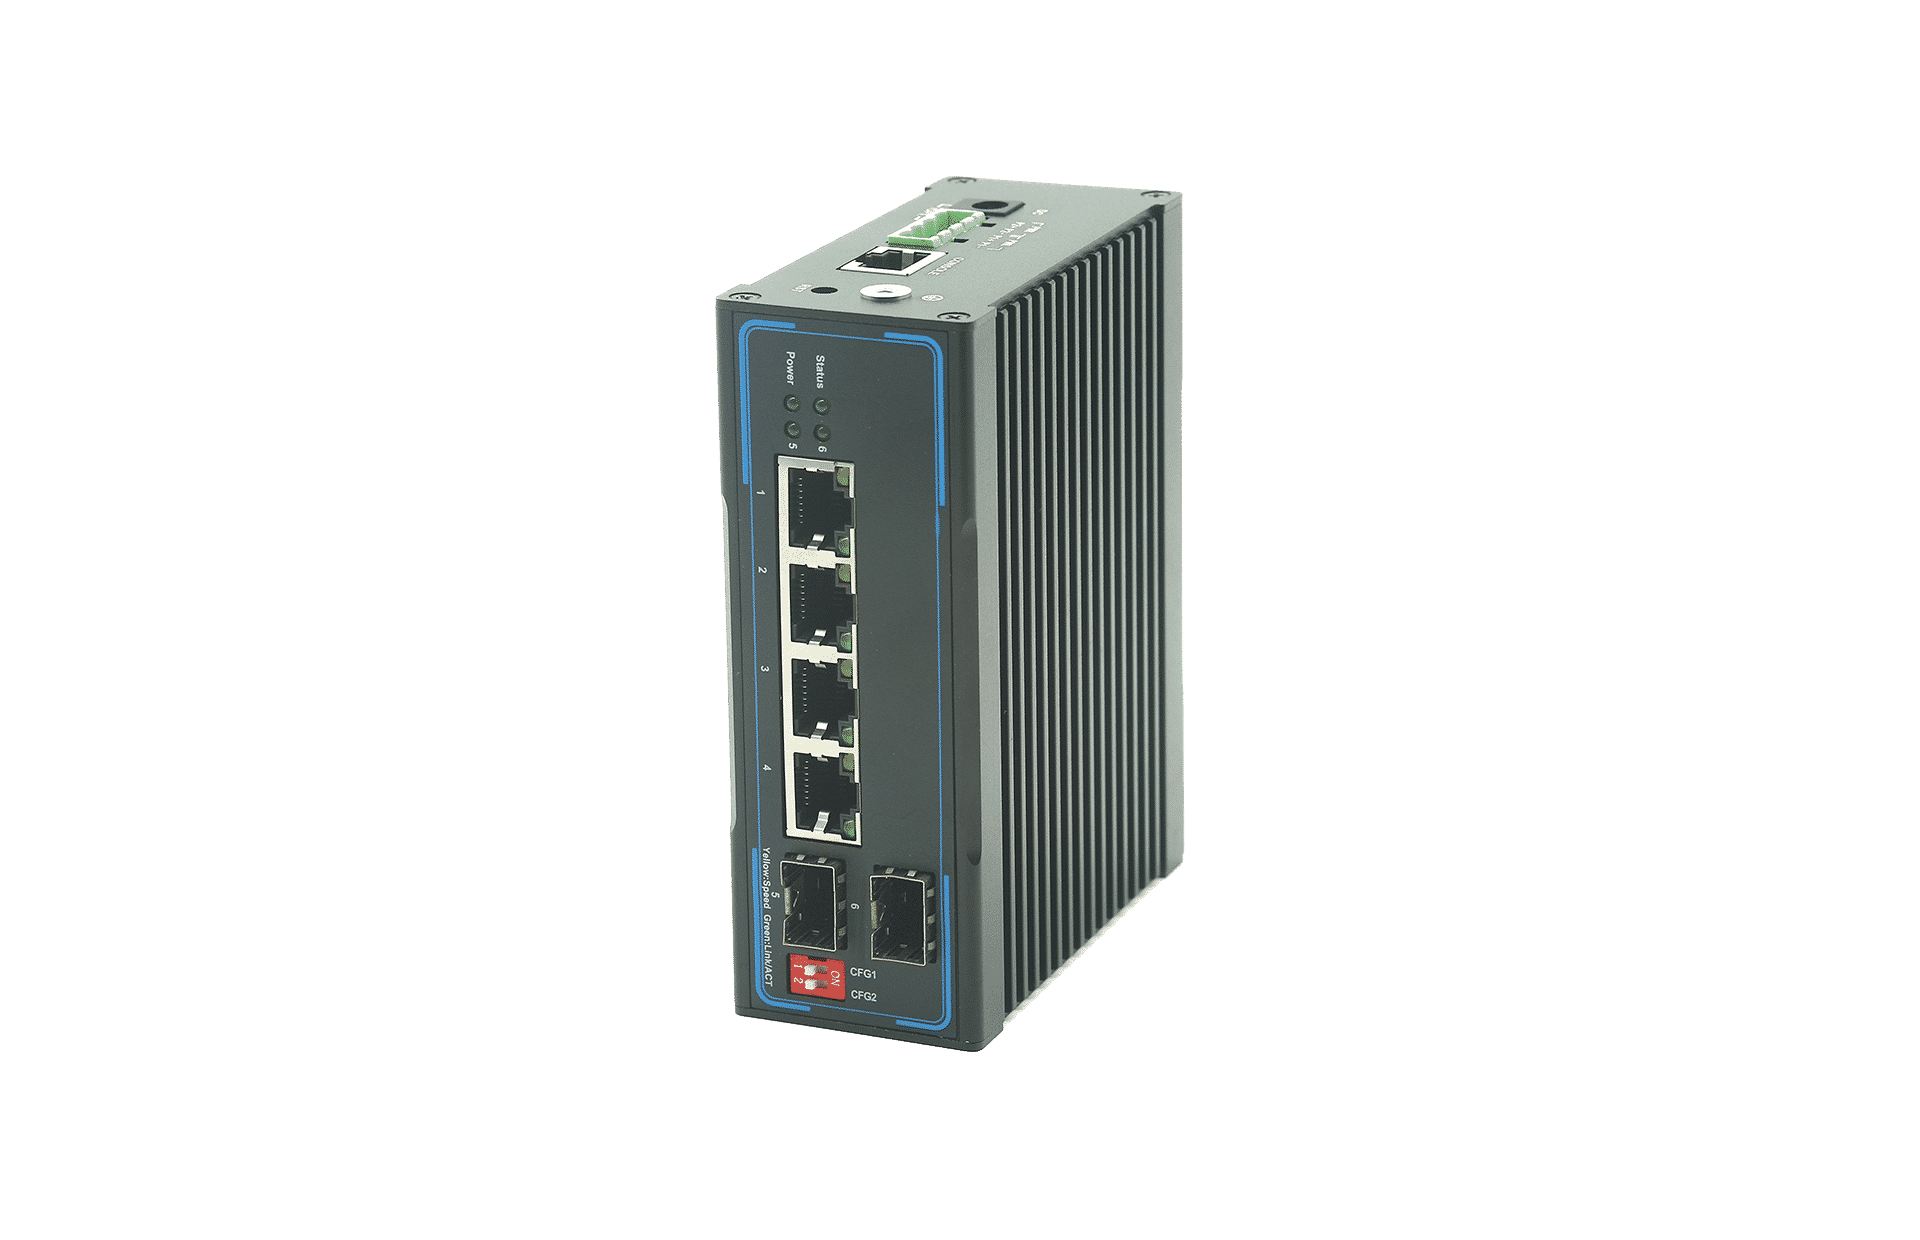 4 Ports 10/100/1000Mbps Managed Industrial PoE Switch with 2 Gigabit SFP